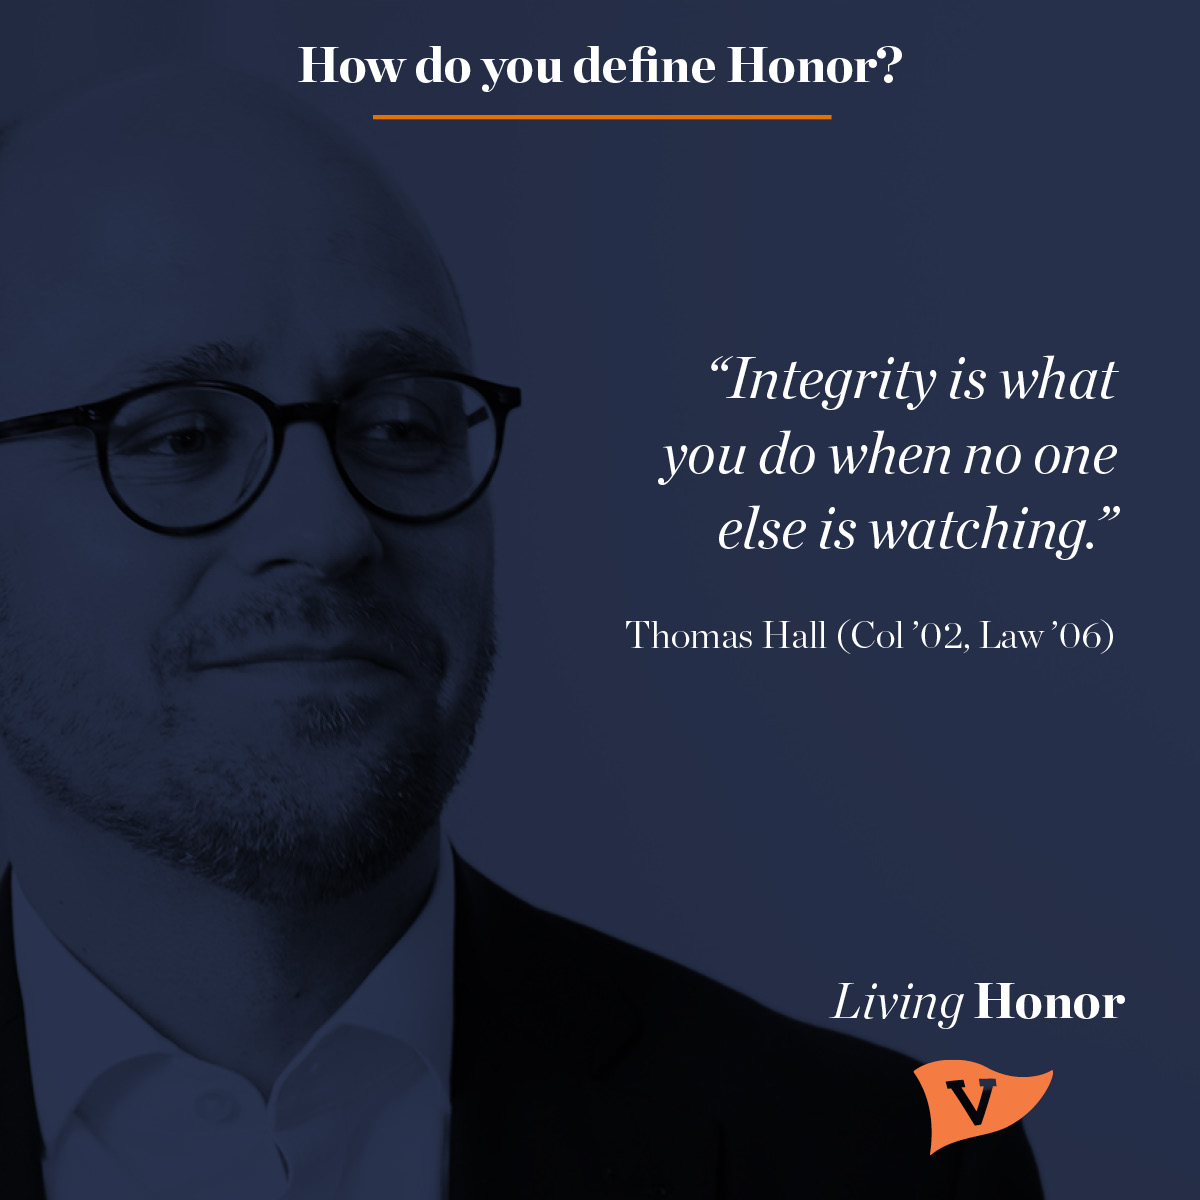 HOw do your define Honor? "Integrity is what you do when no one else is watching." - Thomas Hall (College '02, Law '06)